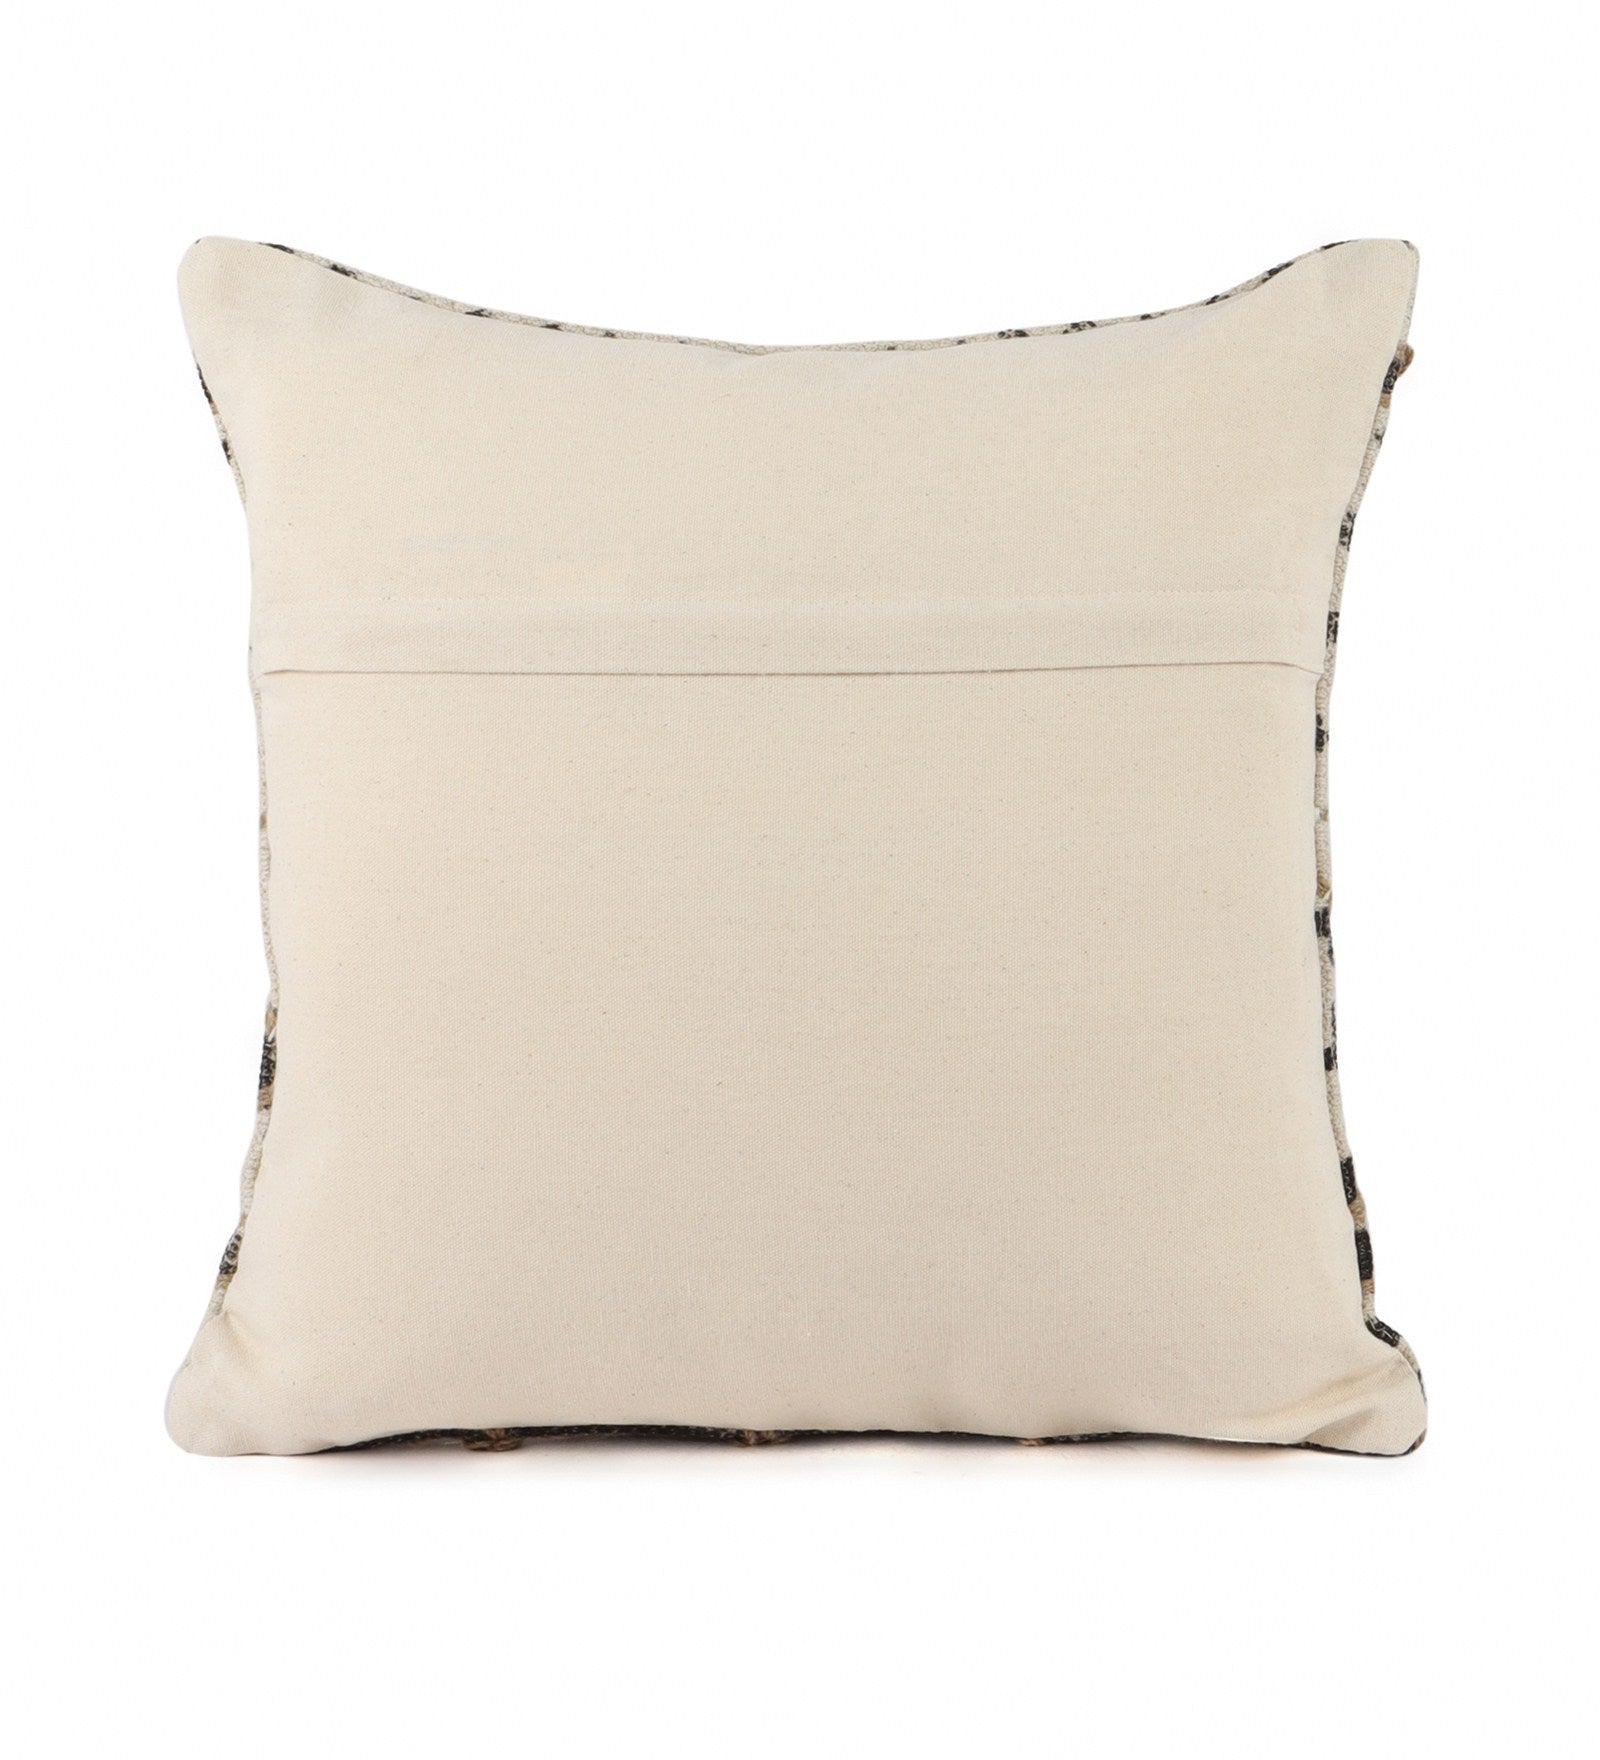 Embroidered Contemporary Cushion Cover (Beige Commas)